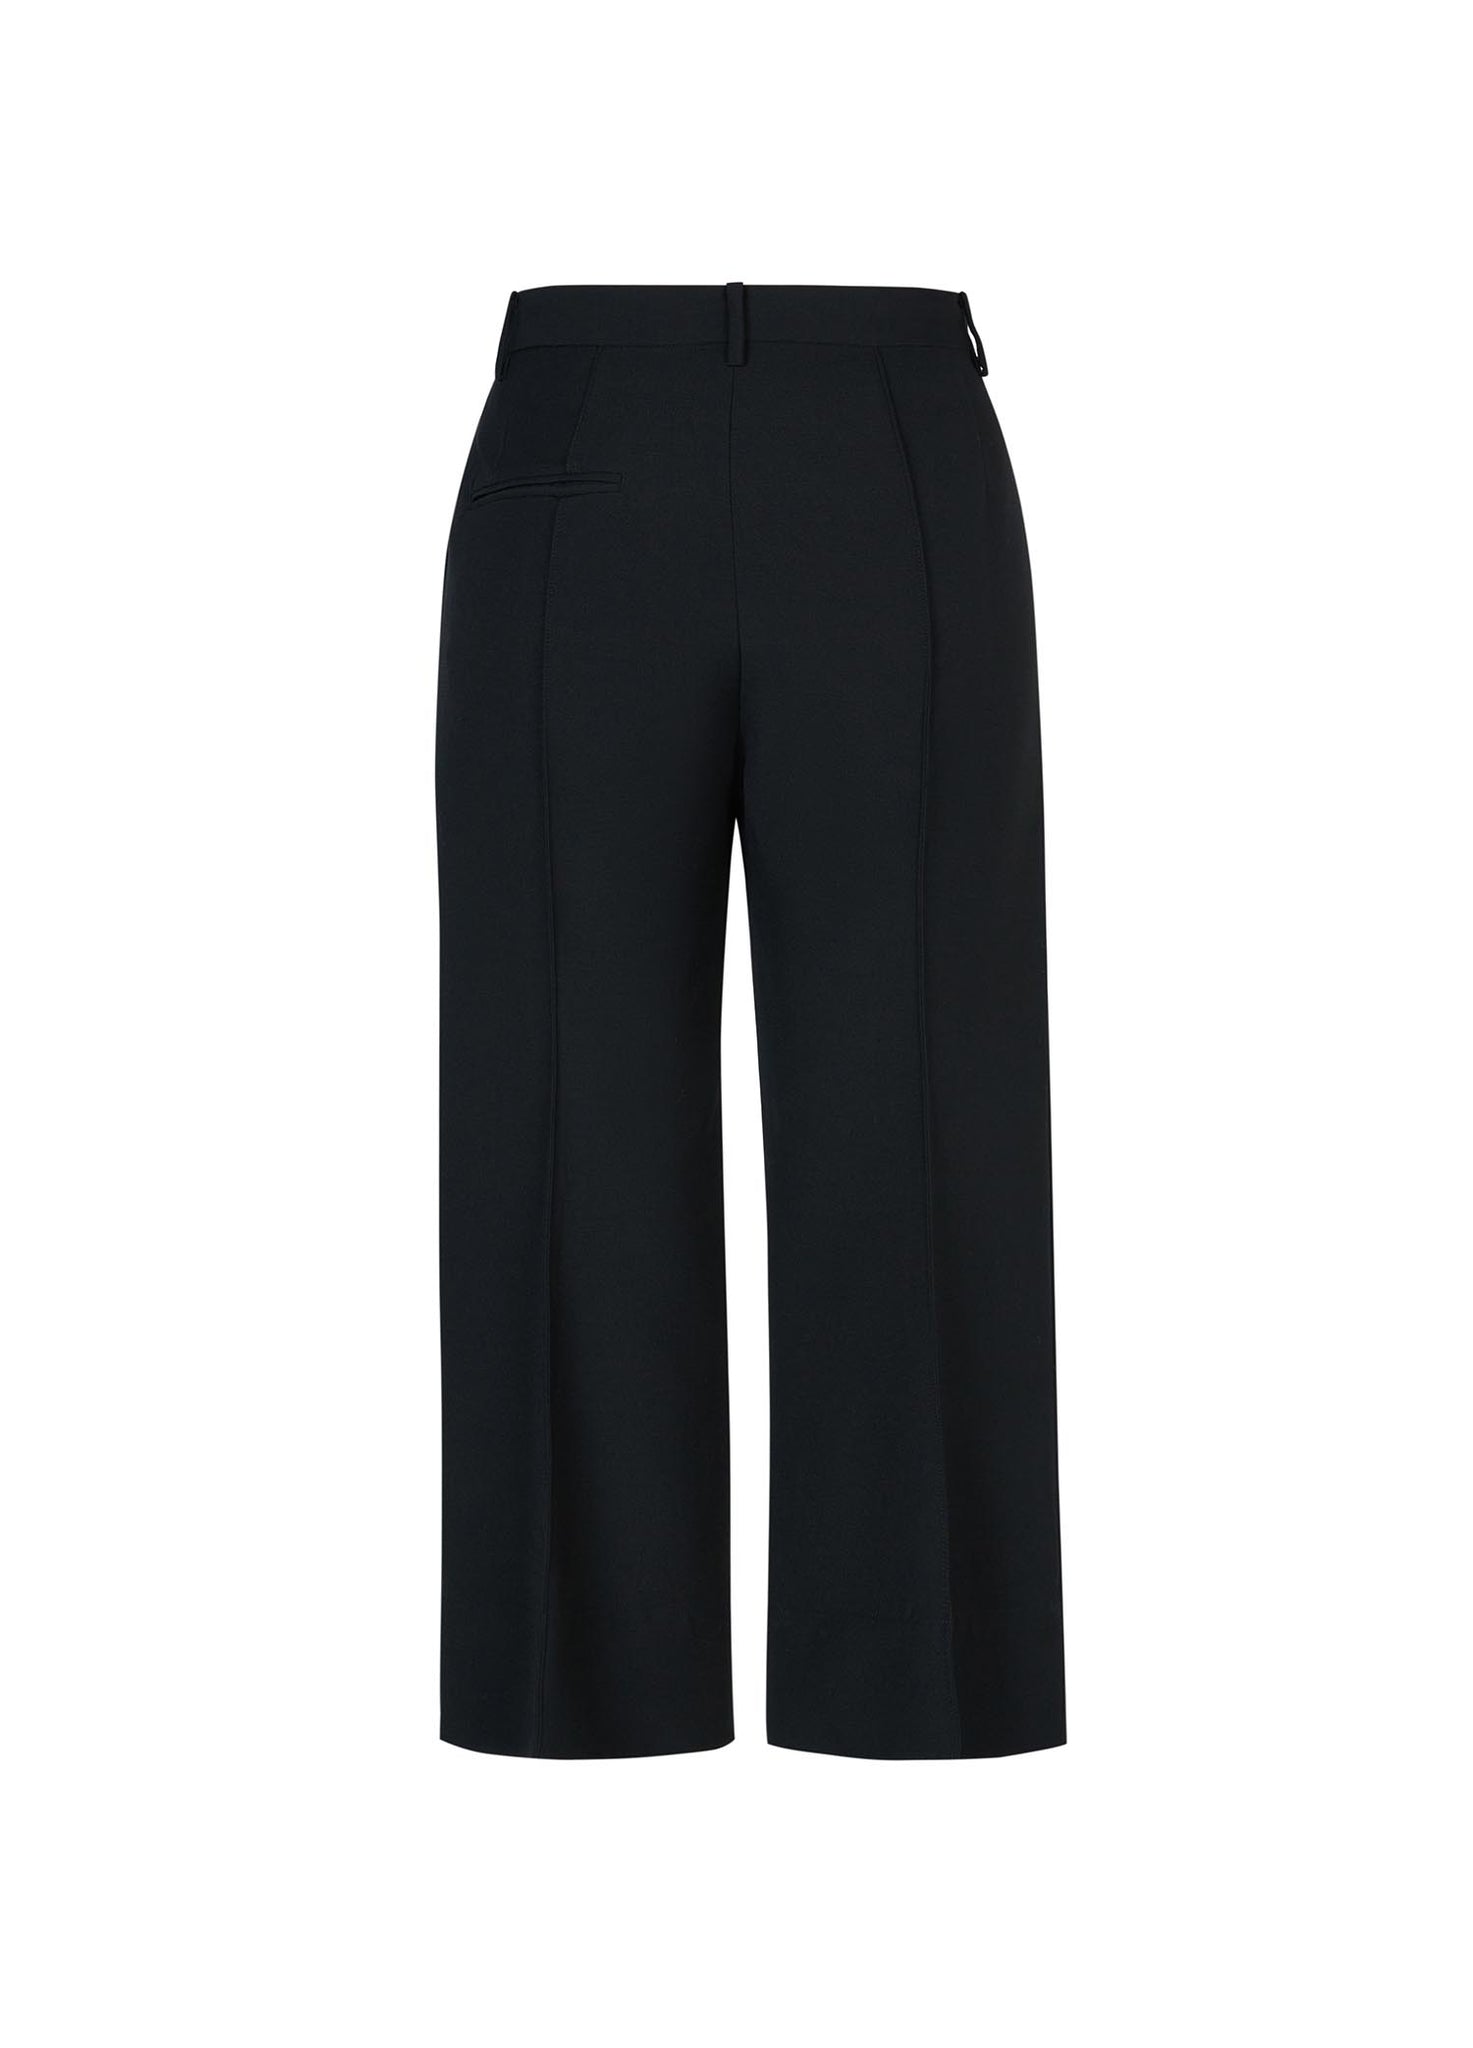 Pants / JNBY Wool Blended Casual Cropped Pants（Black Friday Flash Sale)